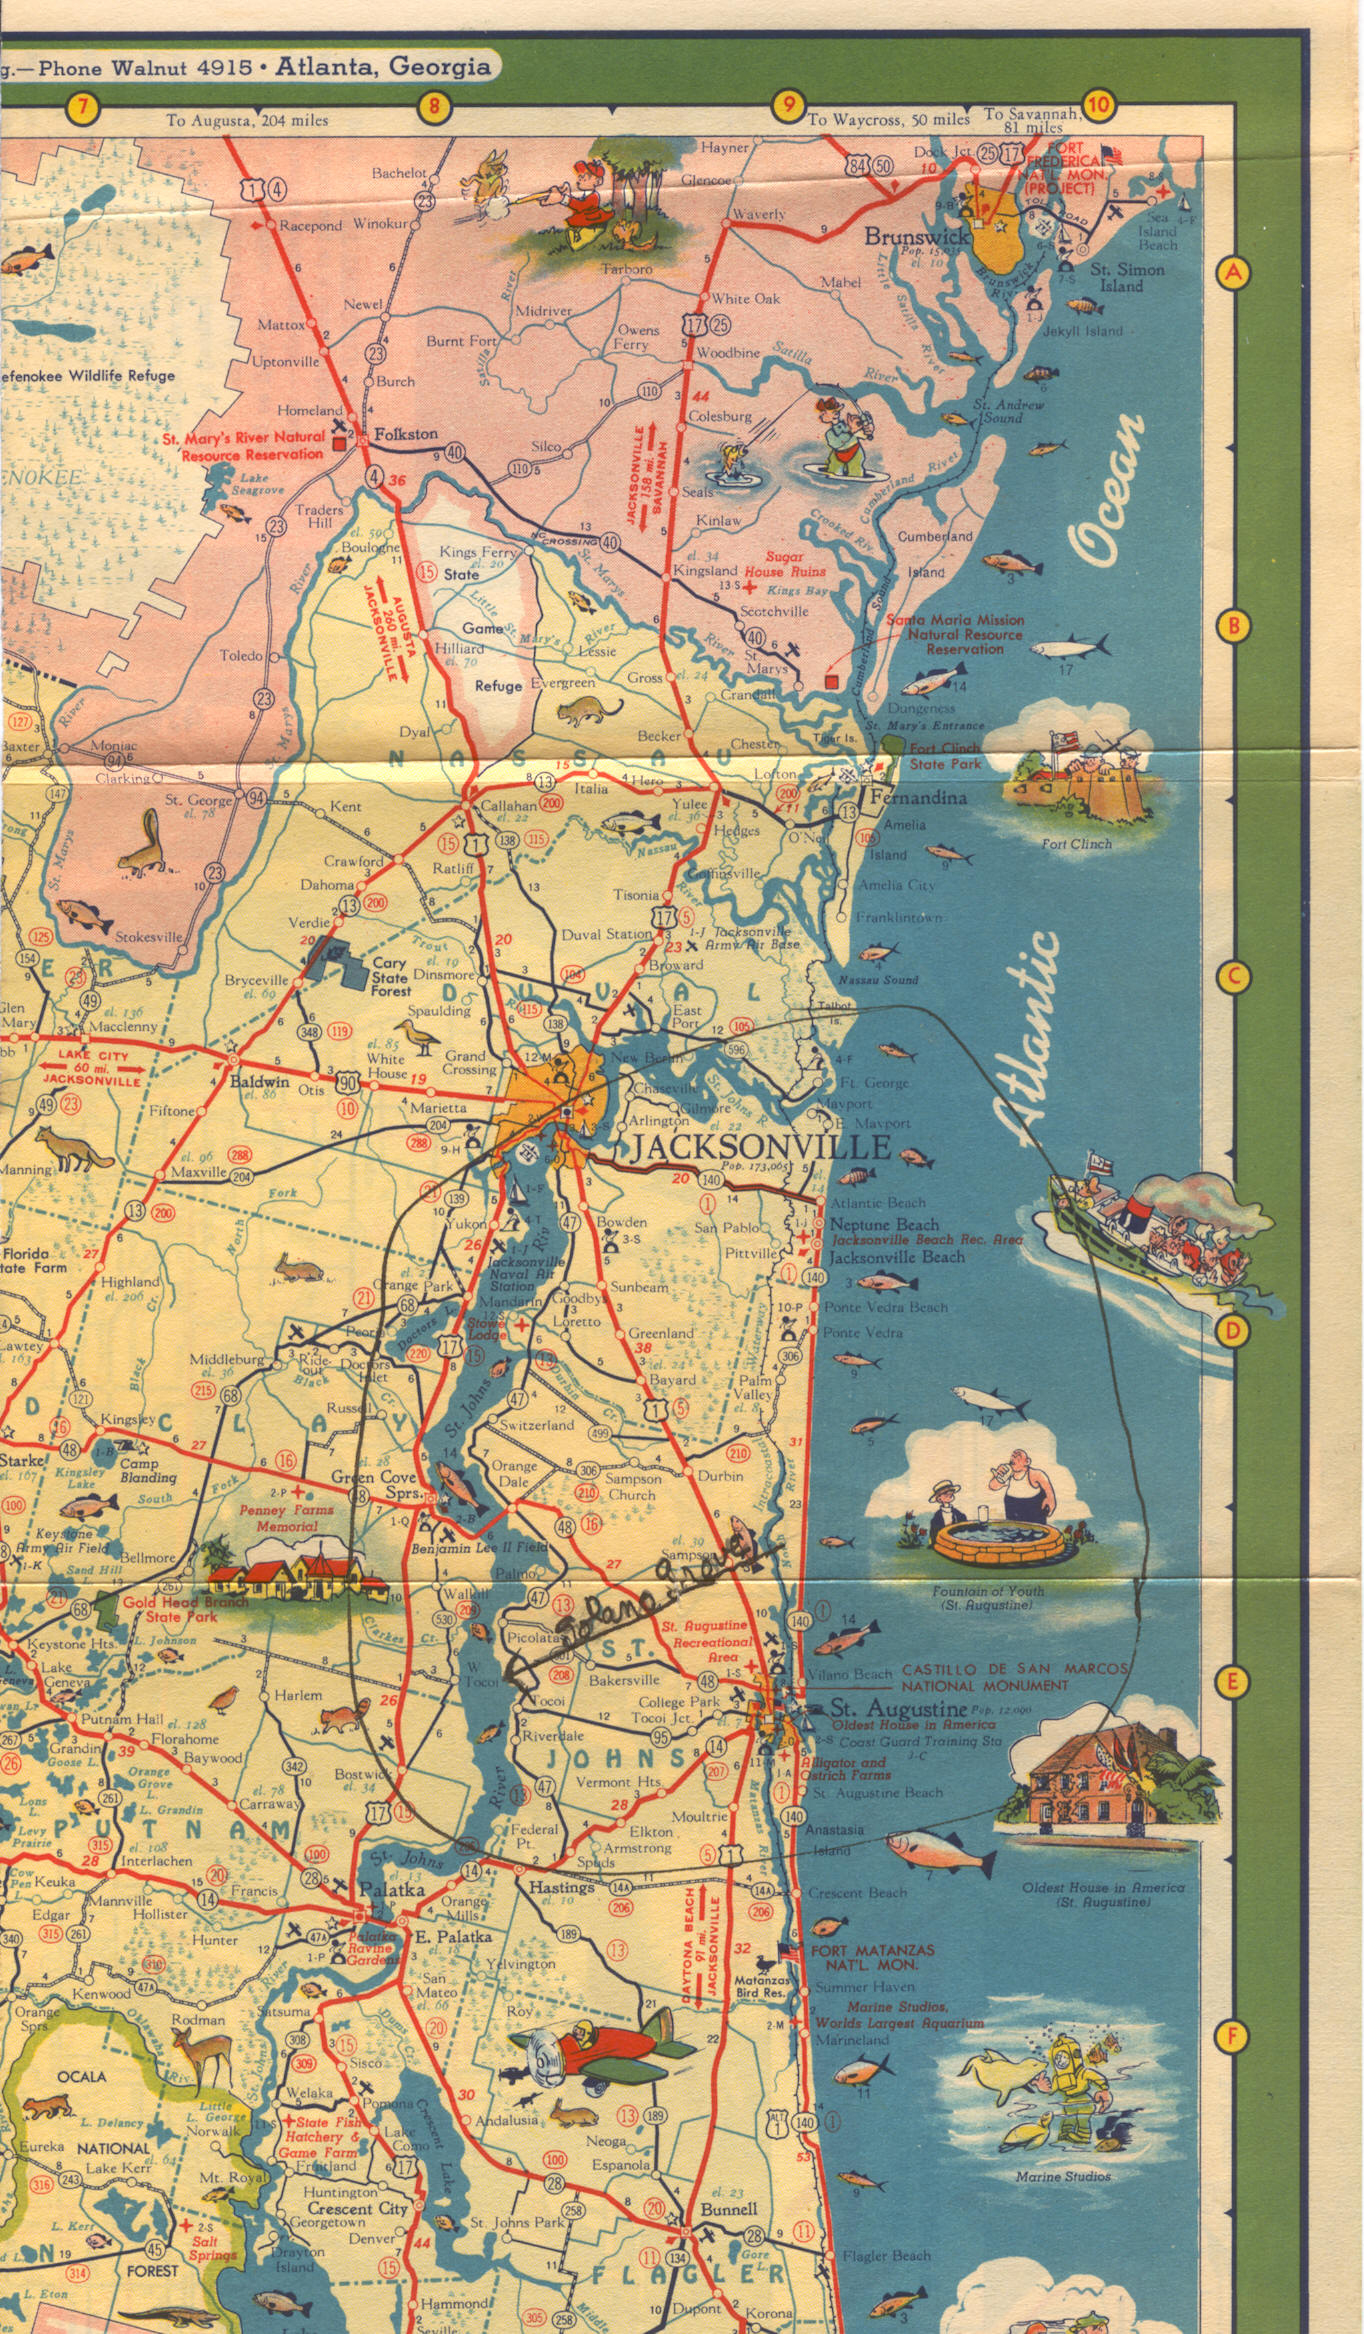 A Delius Picture Gallery - Old Florida Road Maps